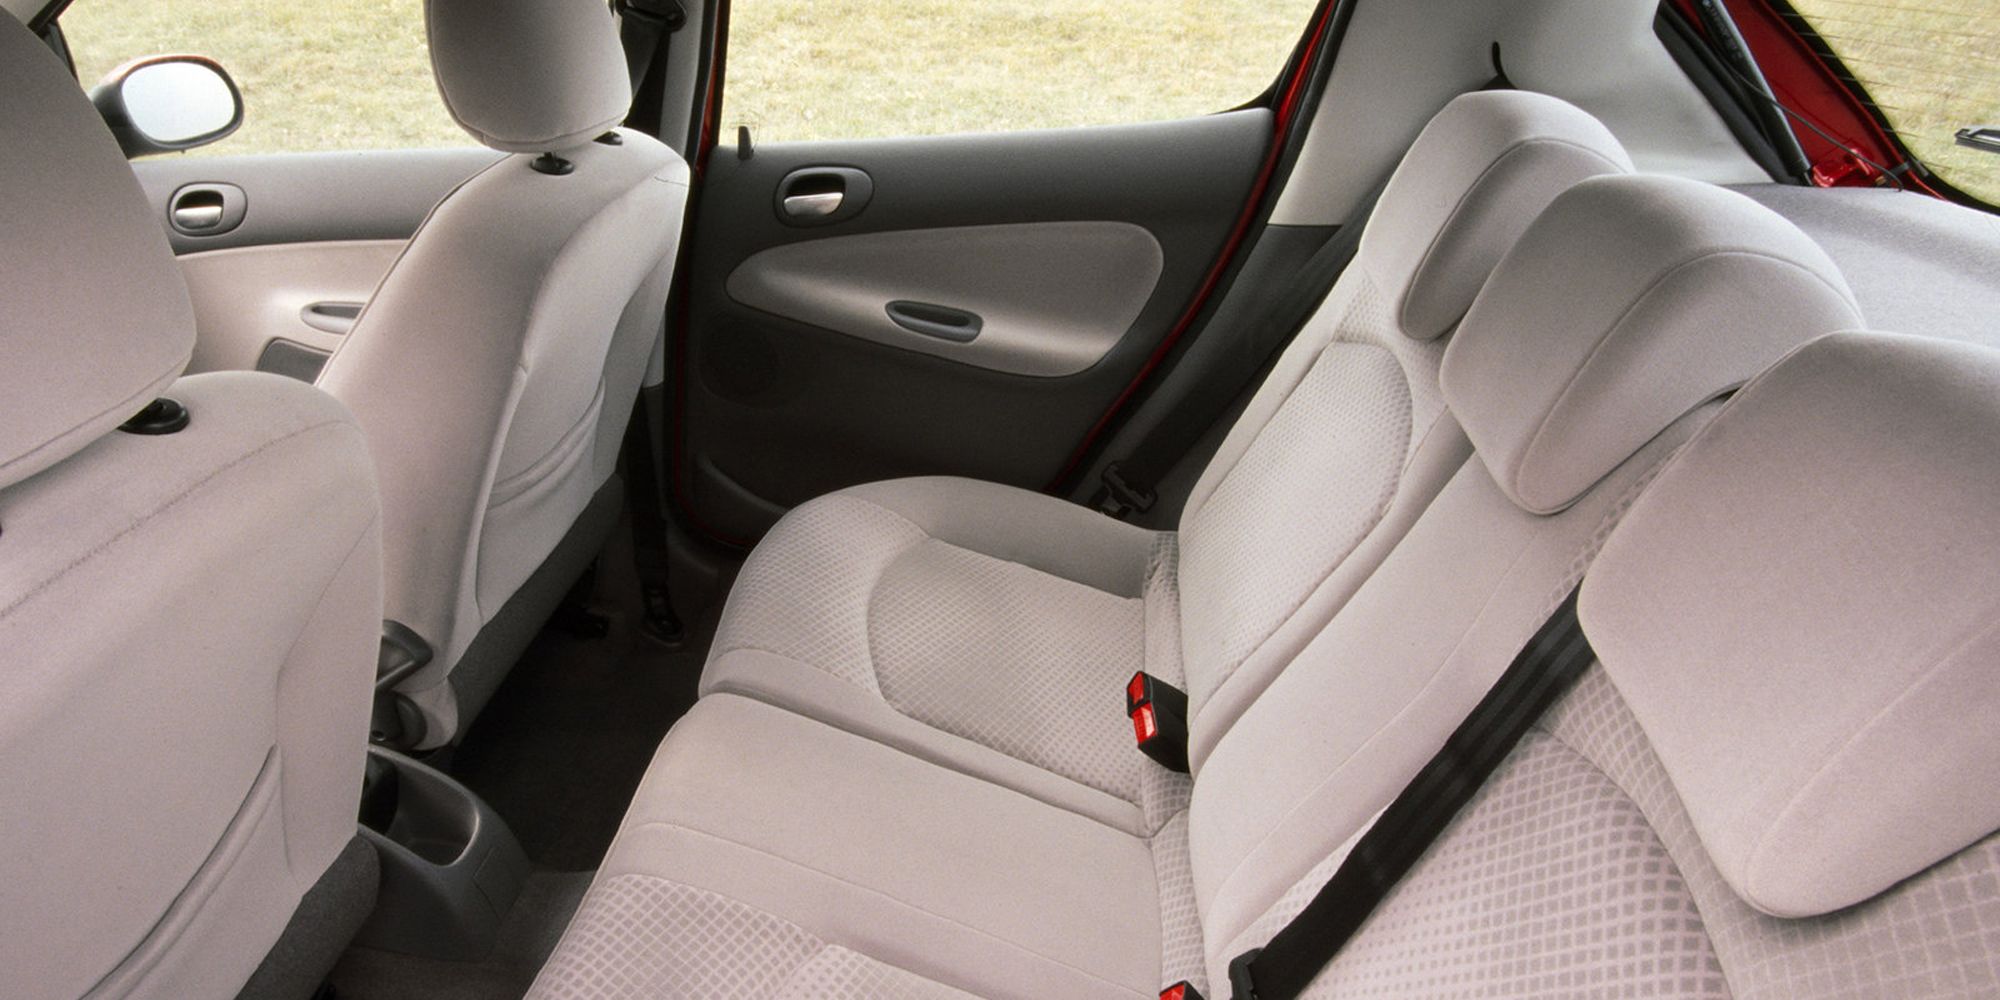 The rear seats in the 206